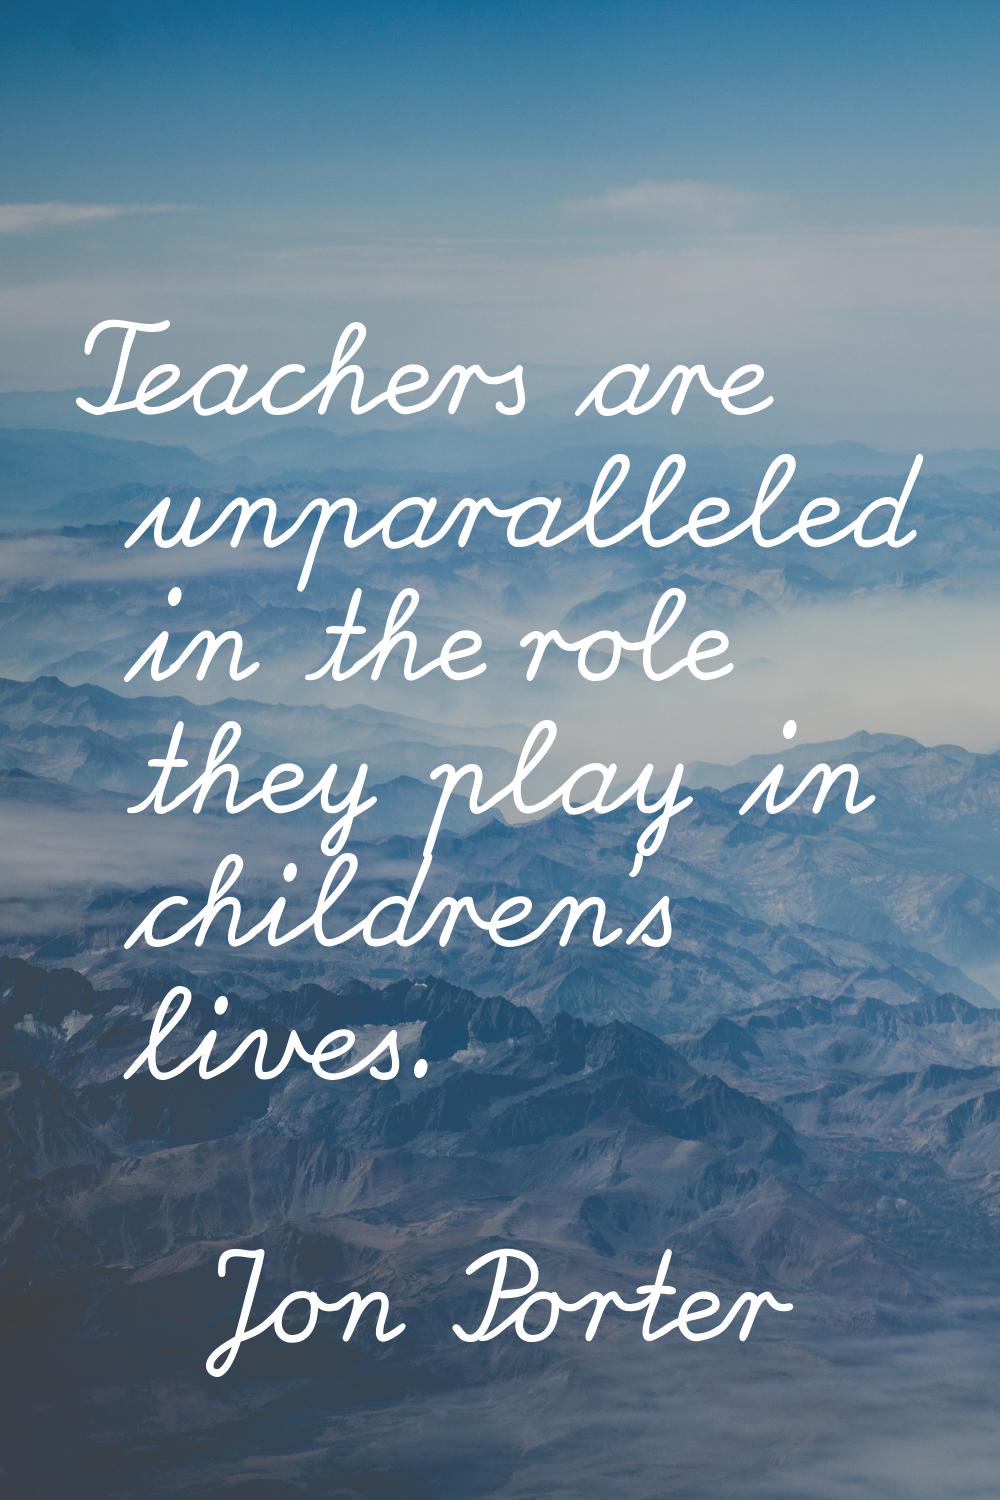 Teachers are unparalleled in the role they play in children's lives.